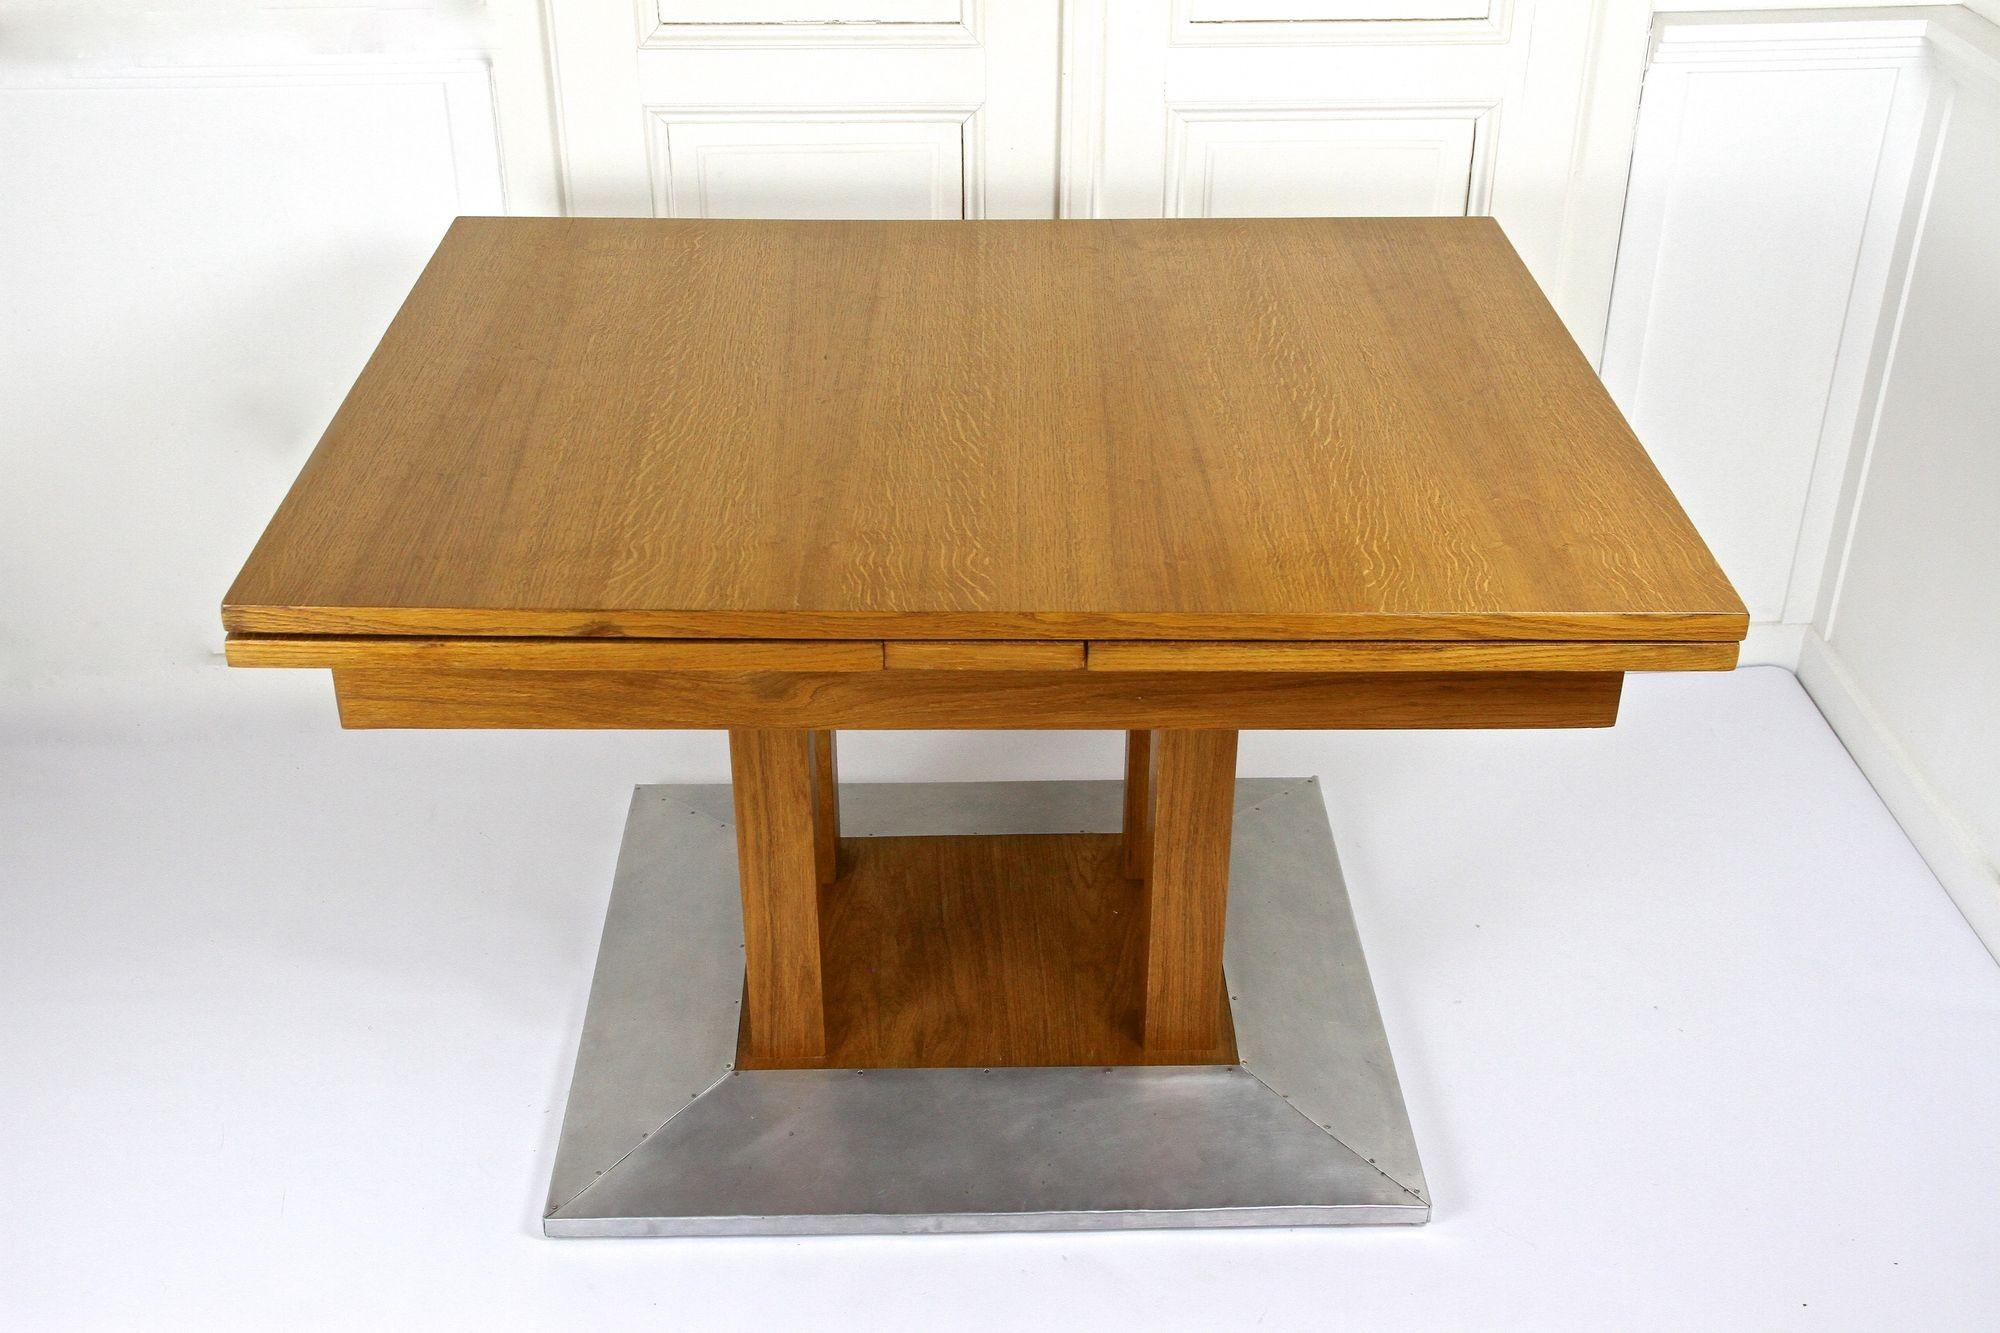 Striking 20th century oakwood dining table from the early Art Nouveau period in Austria around 1905. A timeless, modern design from the pen of none other than the great renowed Austrian architect and founder of the worlwide known 